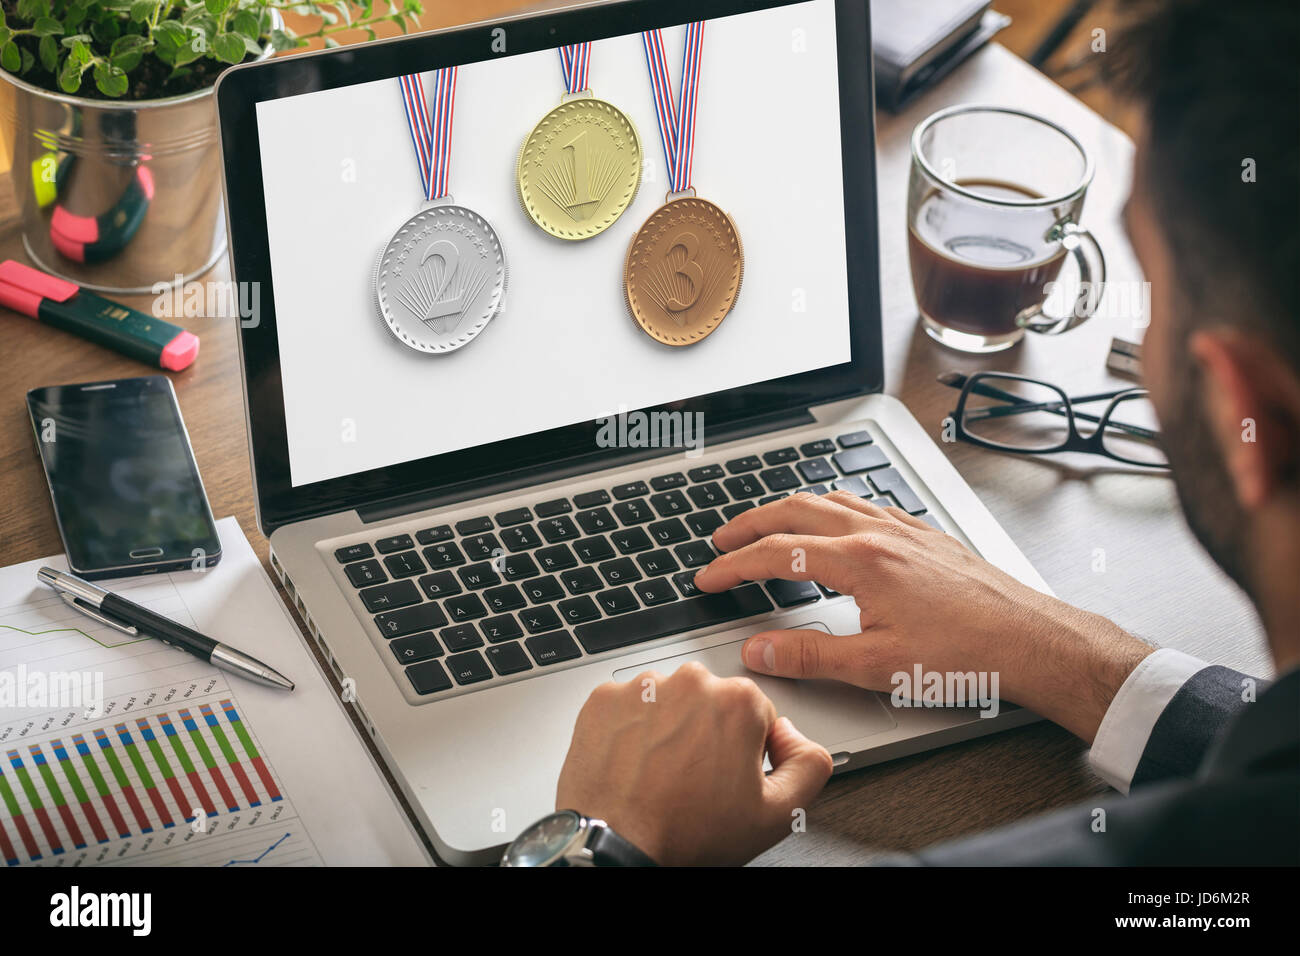 Set of medals - golden, silver and bronze - on a laptop screen Stock Photo